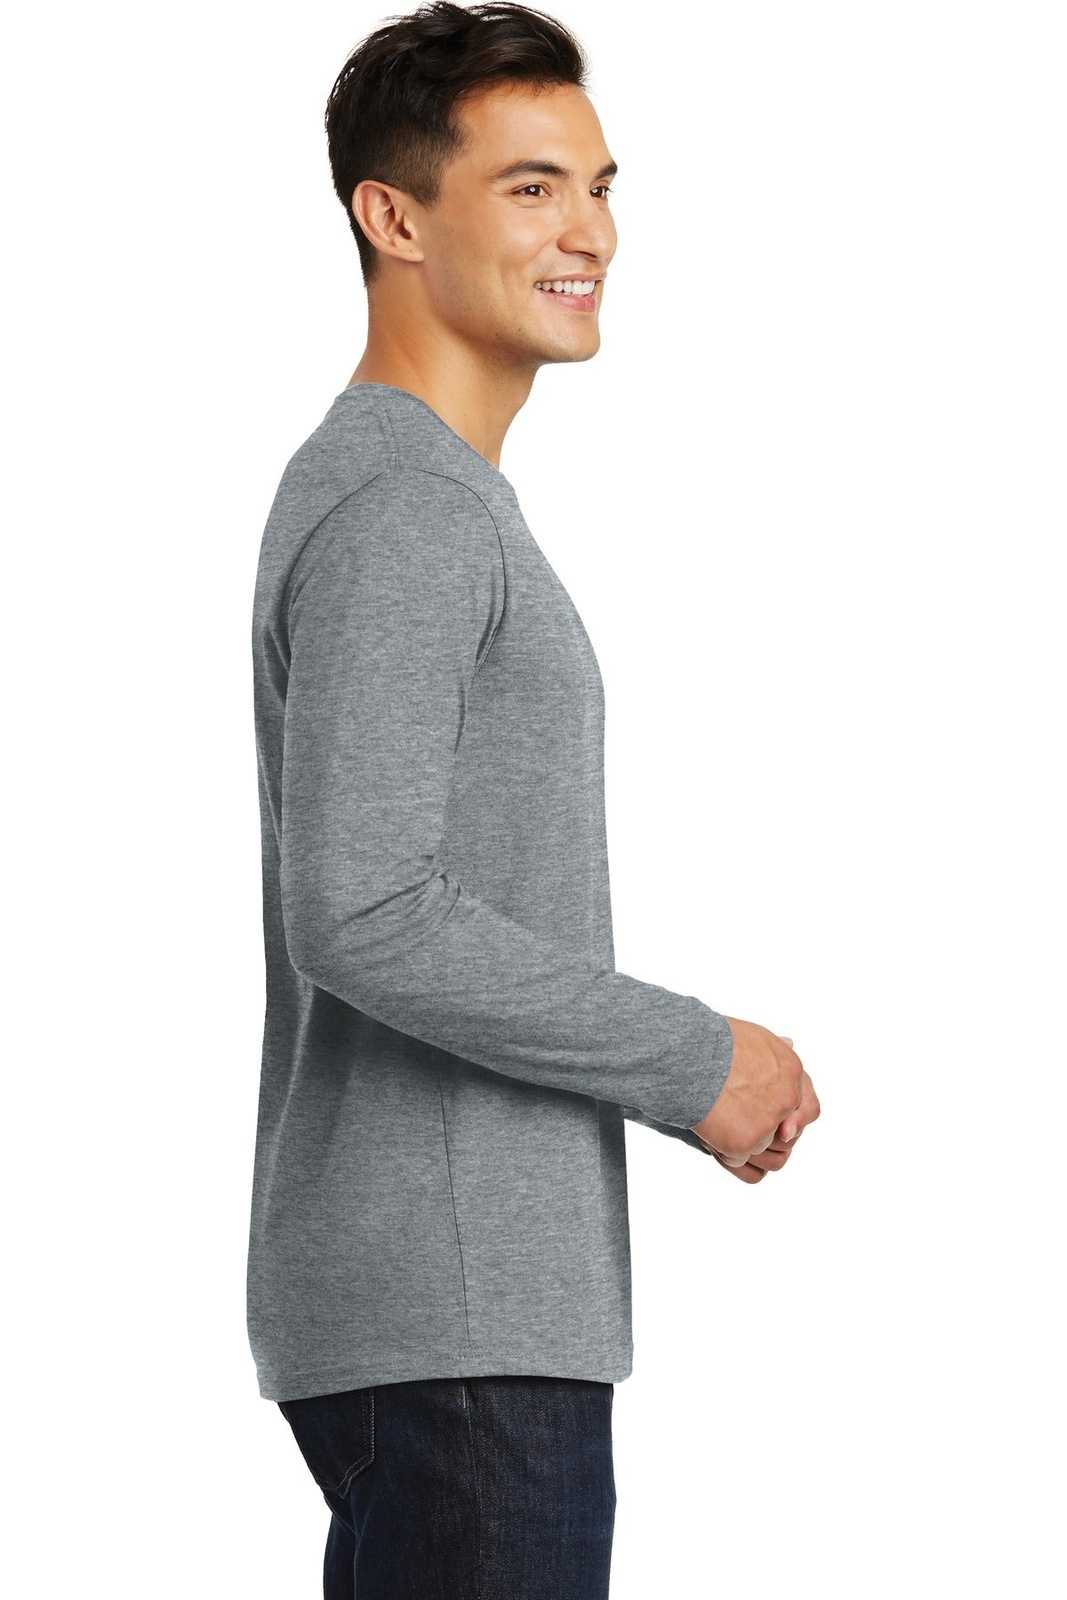 District DT105 Perfect Weight Long Sleeve Tee - Heathered Steel - HIT a Double - 3